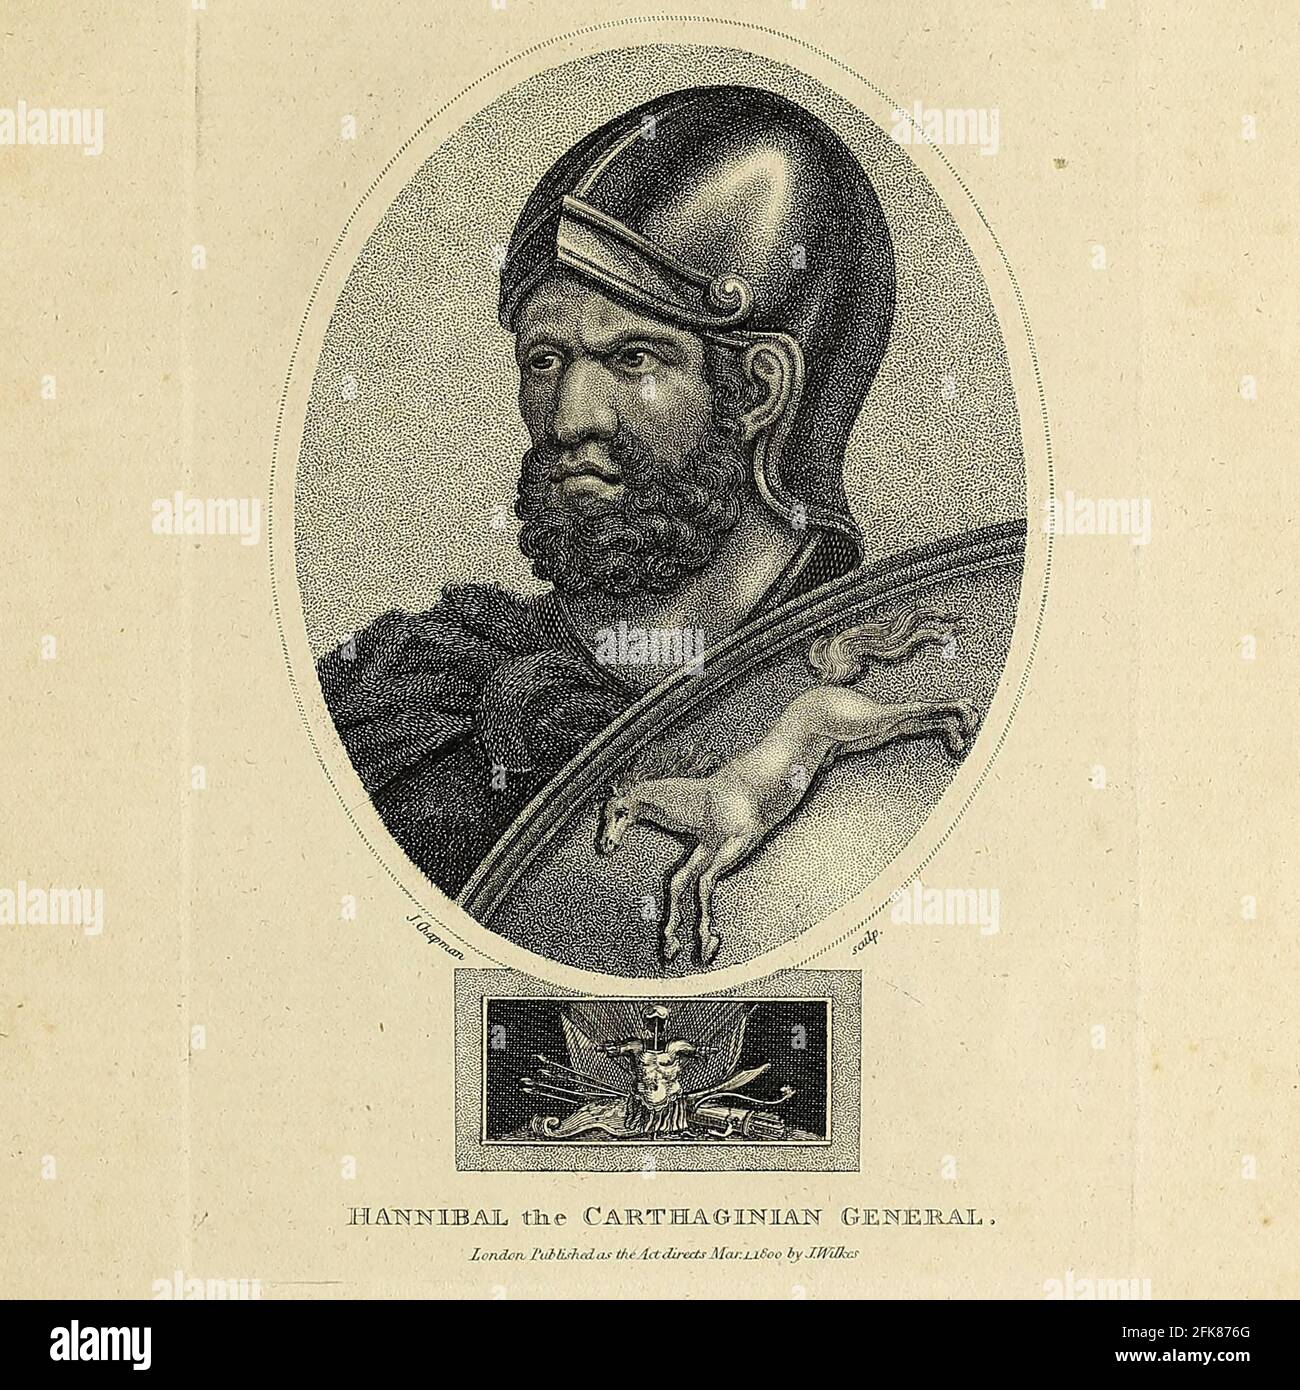 Hannibal (247 – 183 BC) was a Carthaginian general and statesman who commanded Carthage's main forces against the Roman Republic during the Second Punic War. He is widely considered one of the greatest military commanders in human history. Copperplate engraving From the Encyclopaedia Londinensis or, Universal dictionary of arts, sciences, and literature; Volume III;  Edited by Wilkes, John. Published in London in 1810 Stock Photo